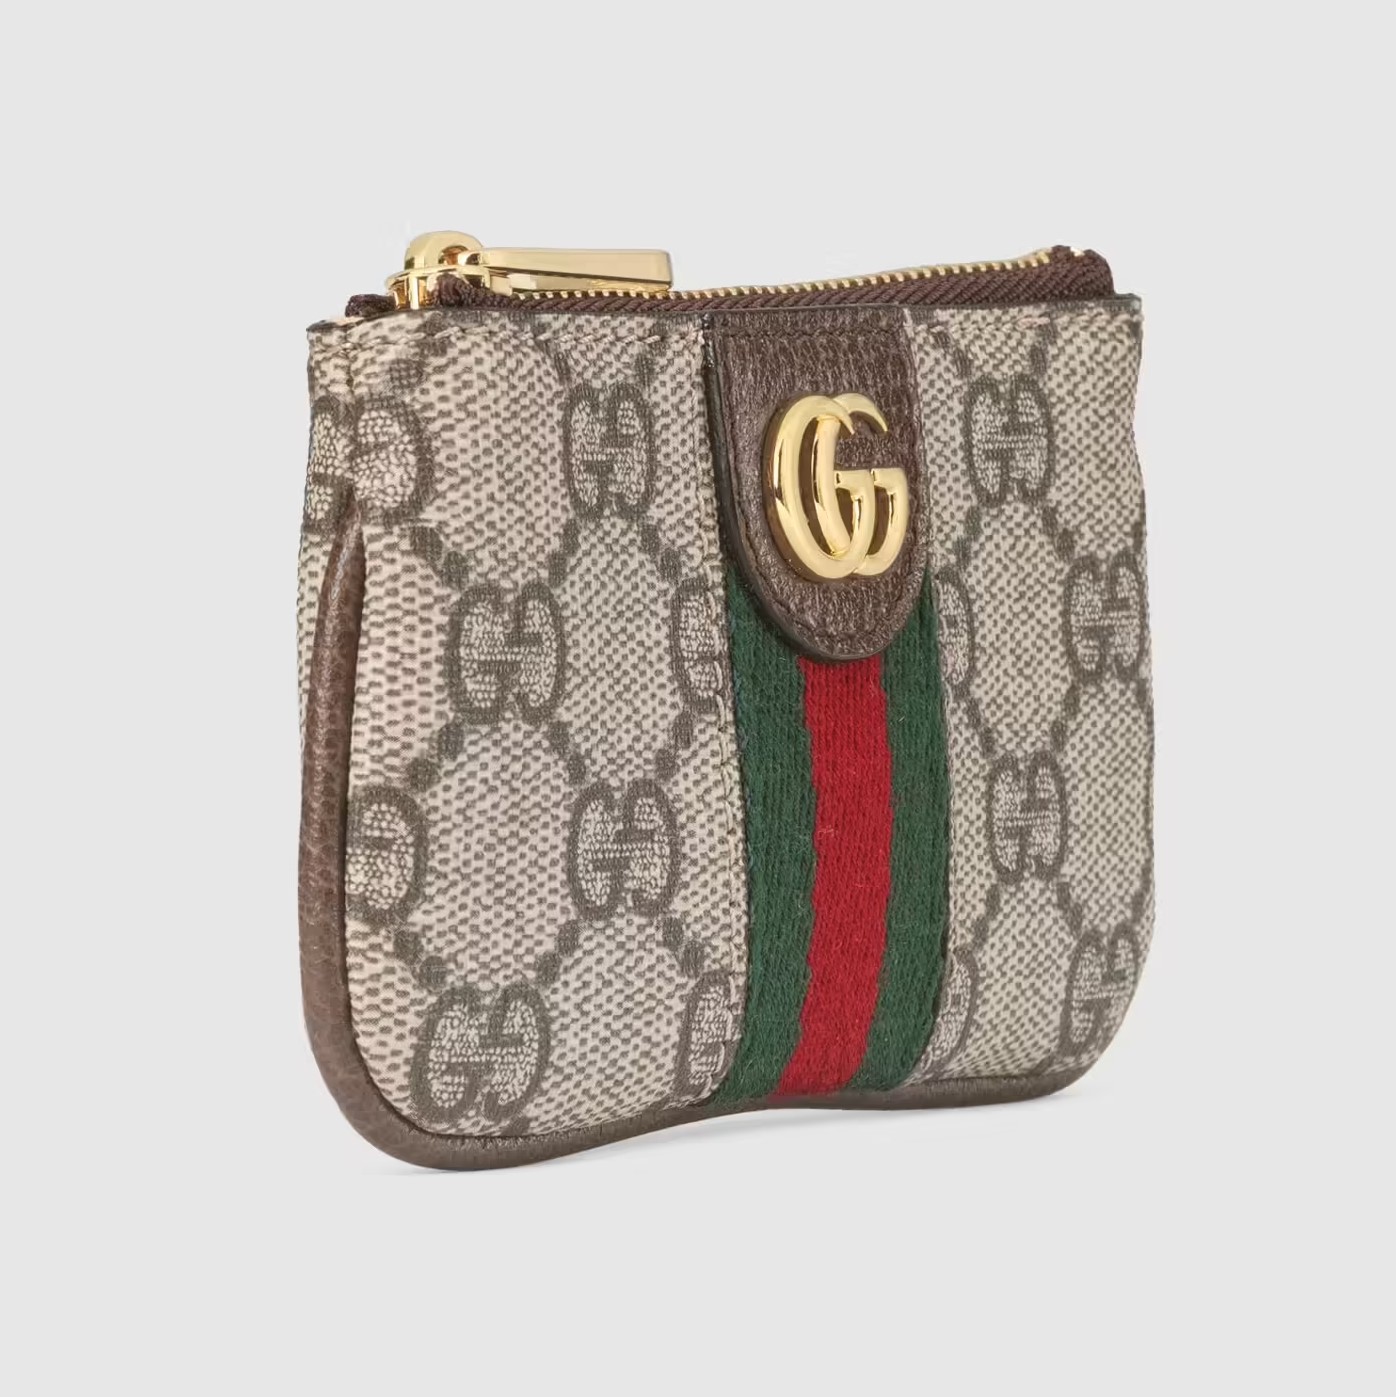 VÍ NỮ GUCCI MINI LIGHT OPHIDIA KEY CASE IN BEIGE AND EBONY GG SUPREME CANVAS 6